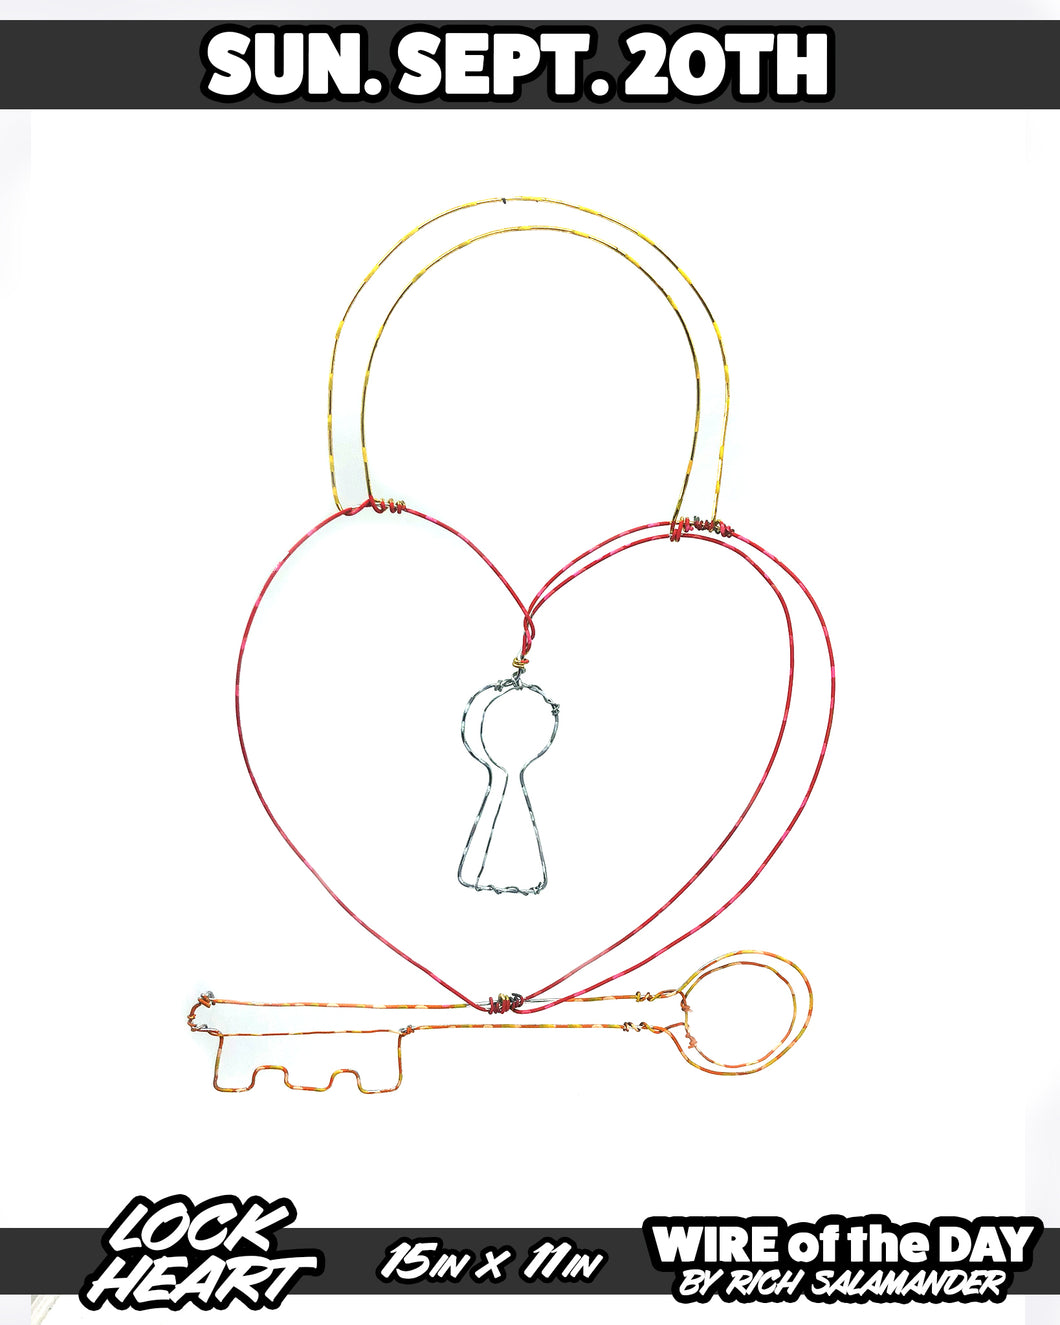 WIRE of the DAY LOCK HEART